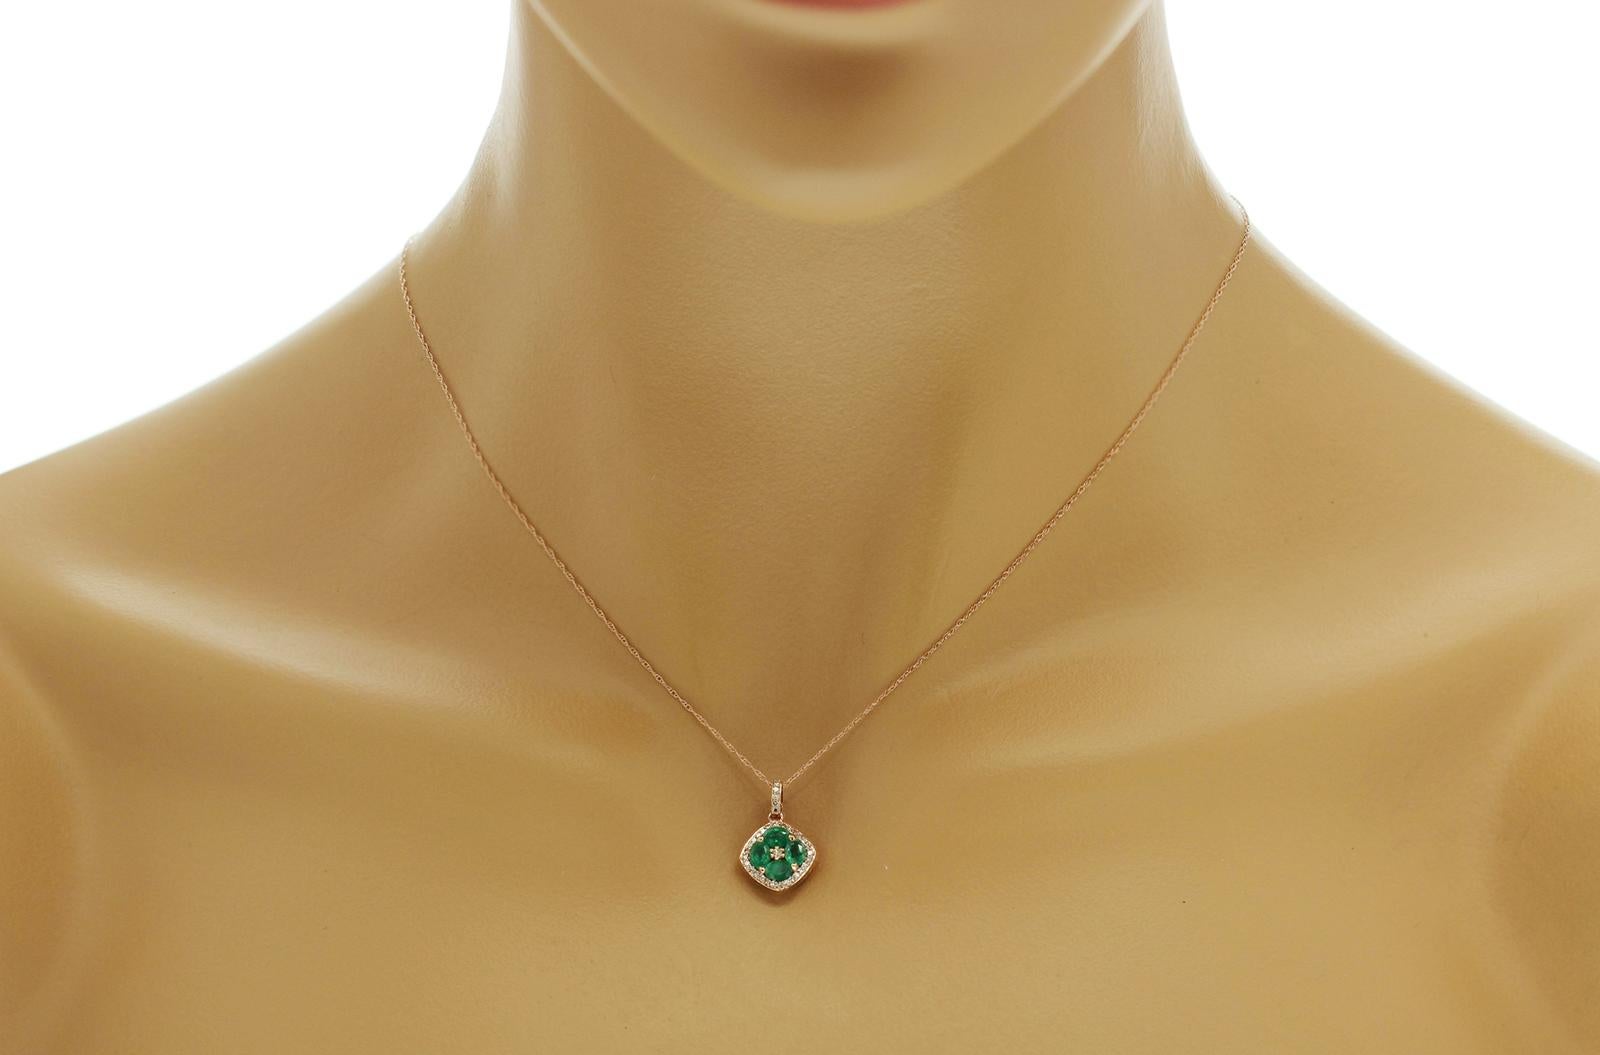 100% Authentic, 100% Customer Satisfaction

Pendant: 12 mm

Chain: 0.5mm

Size: 18 Inches

Metal: 14K Rose Gold

Hallmarks: 14K

Total Weight: 1.6 Grams

Stone Type: 1.20 CT Natural Emerald &  Diamond 0.15 CT  H  SI1

Condition: New With Tag 